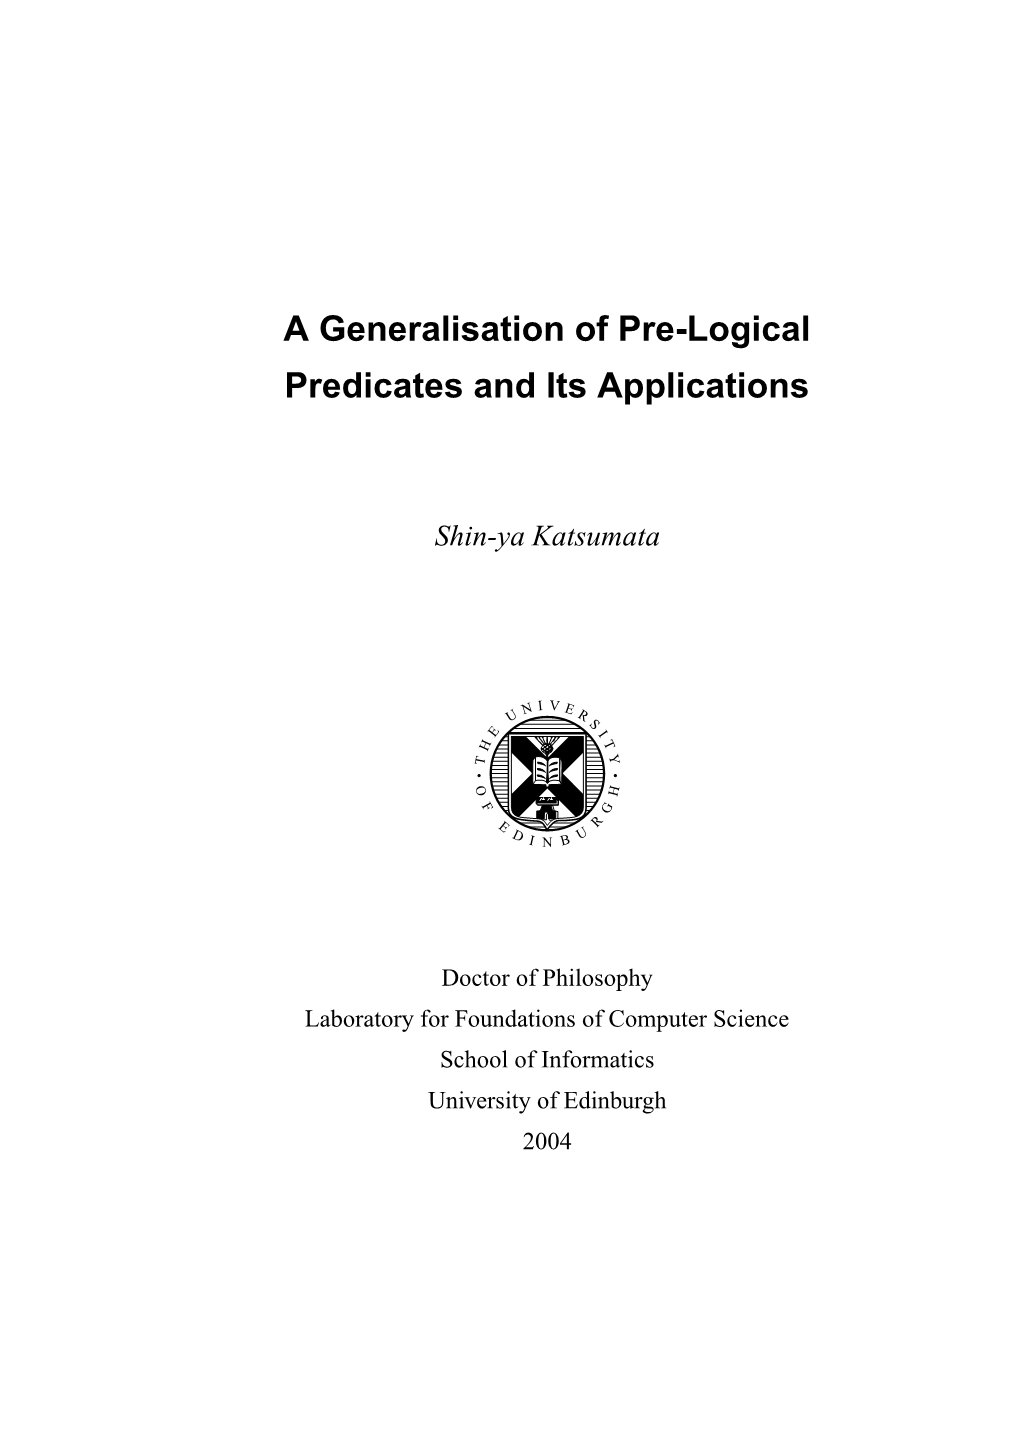 A Generalisation of Pre-Logical Predicates and Its Applications